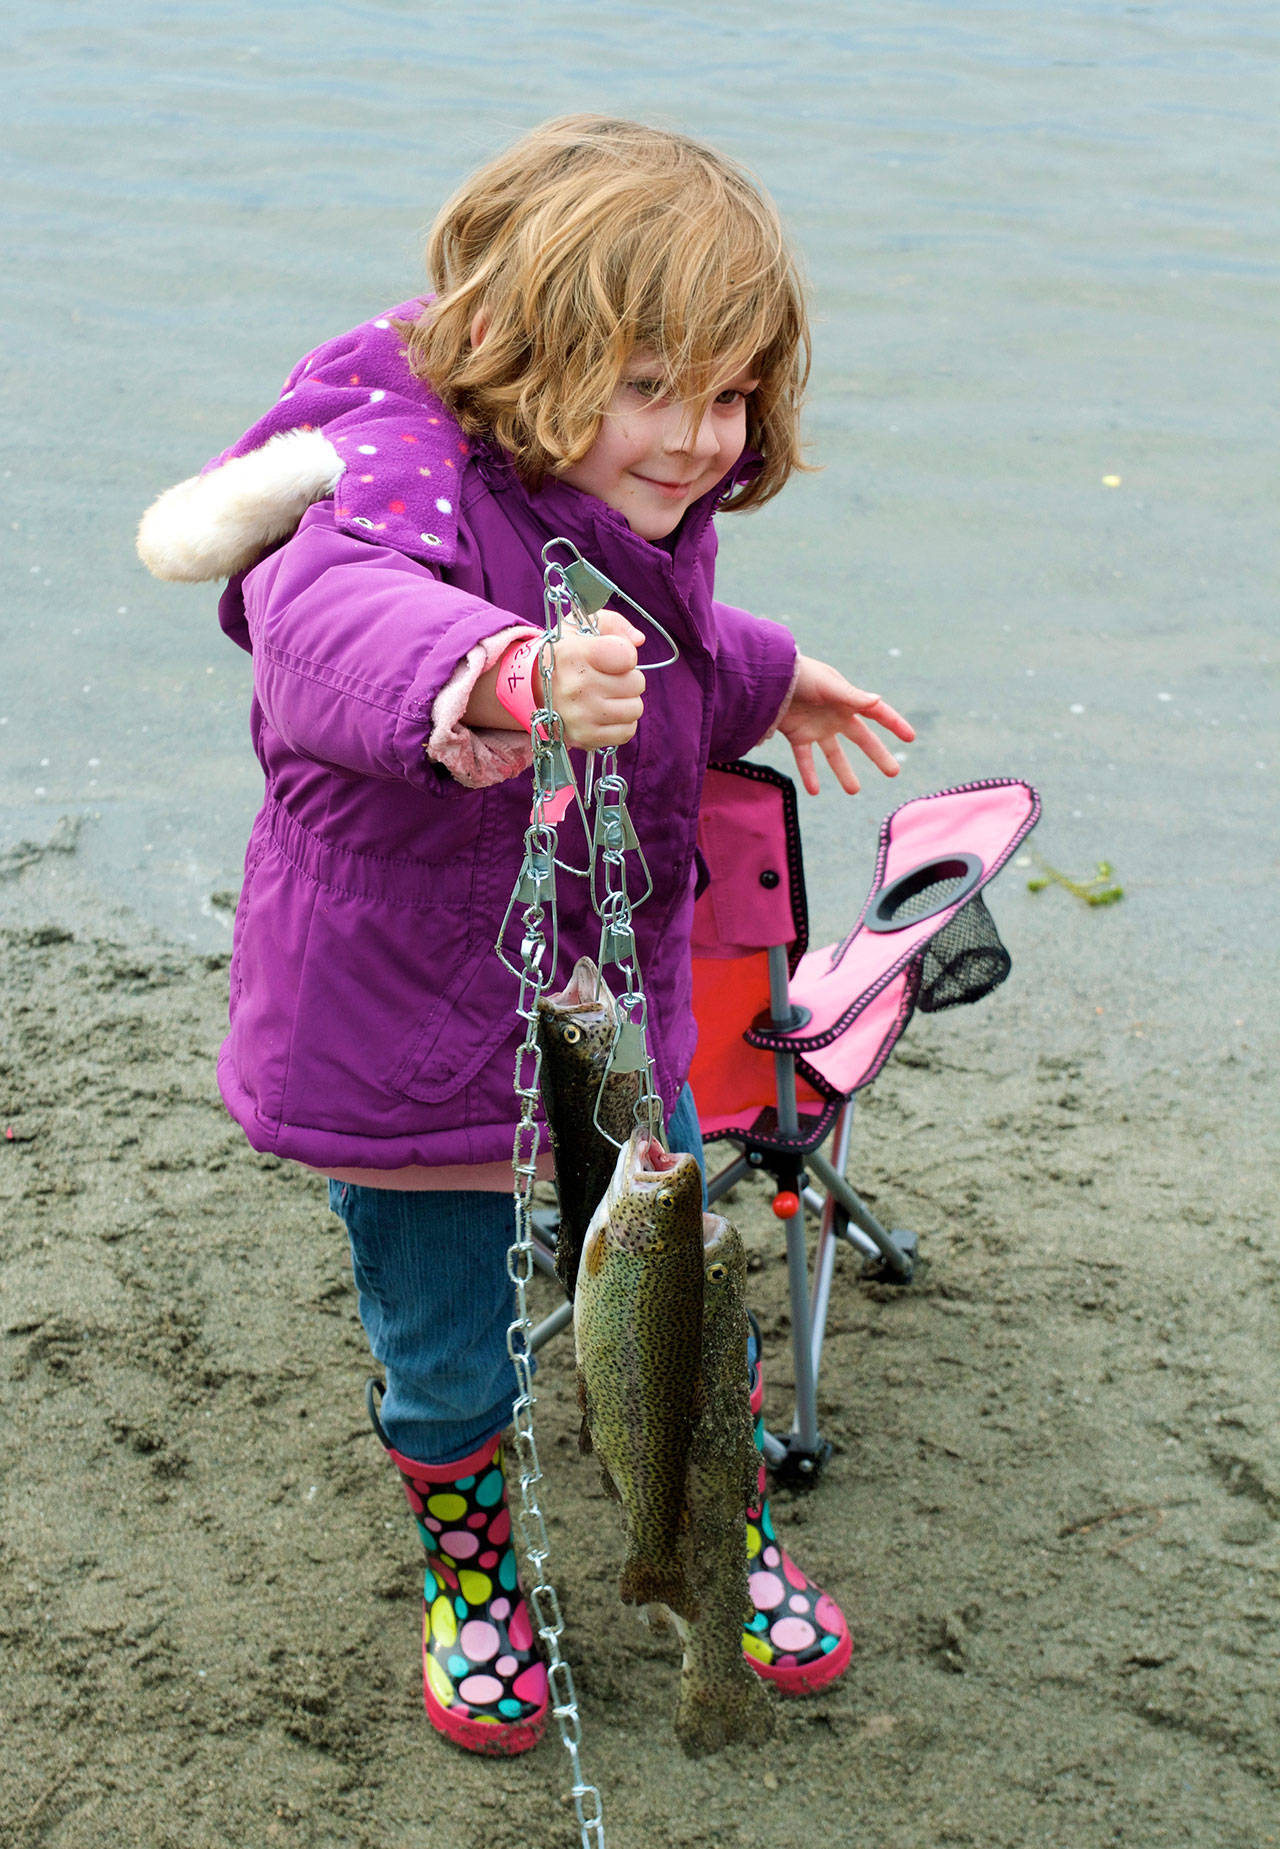 Kahlan Hawley, 4, displays her catch at a fishing event in Everett in 2016. (Photo by Mike Benbow)